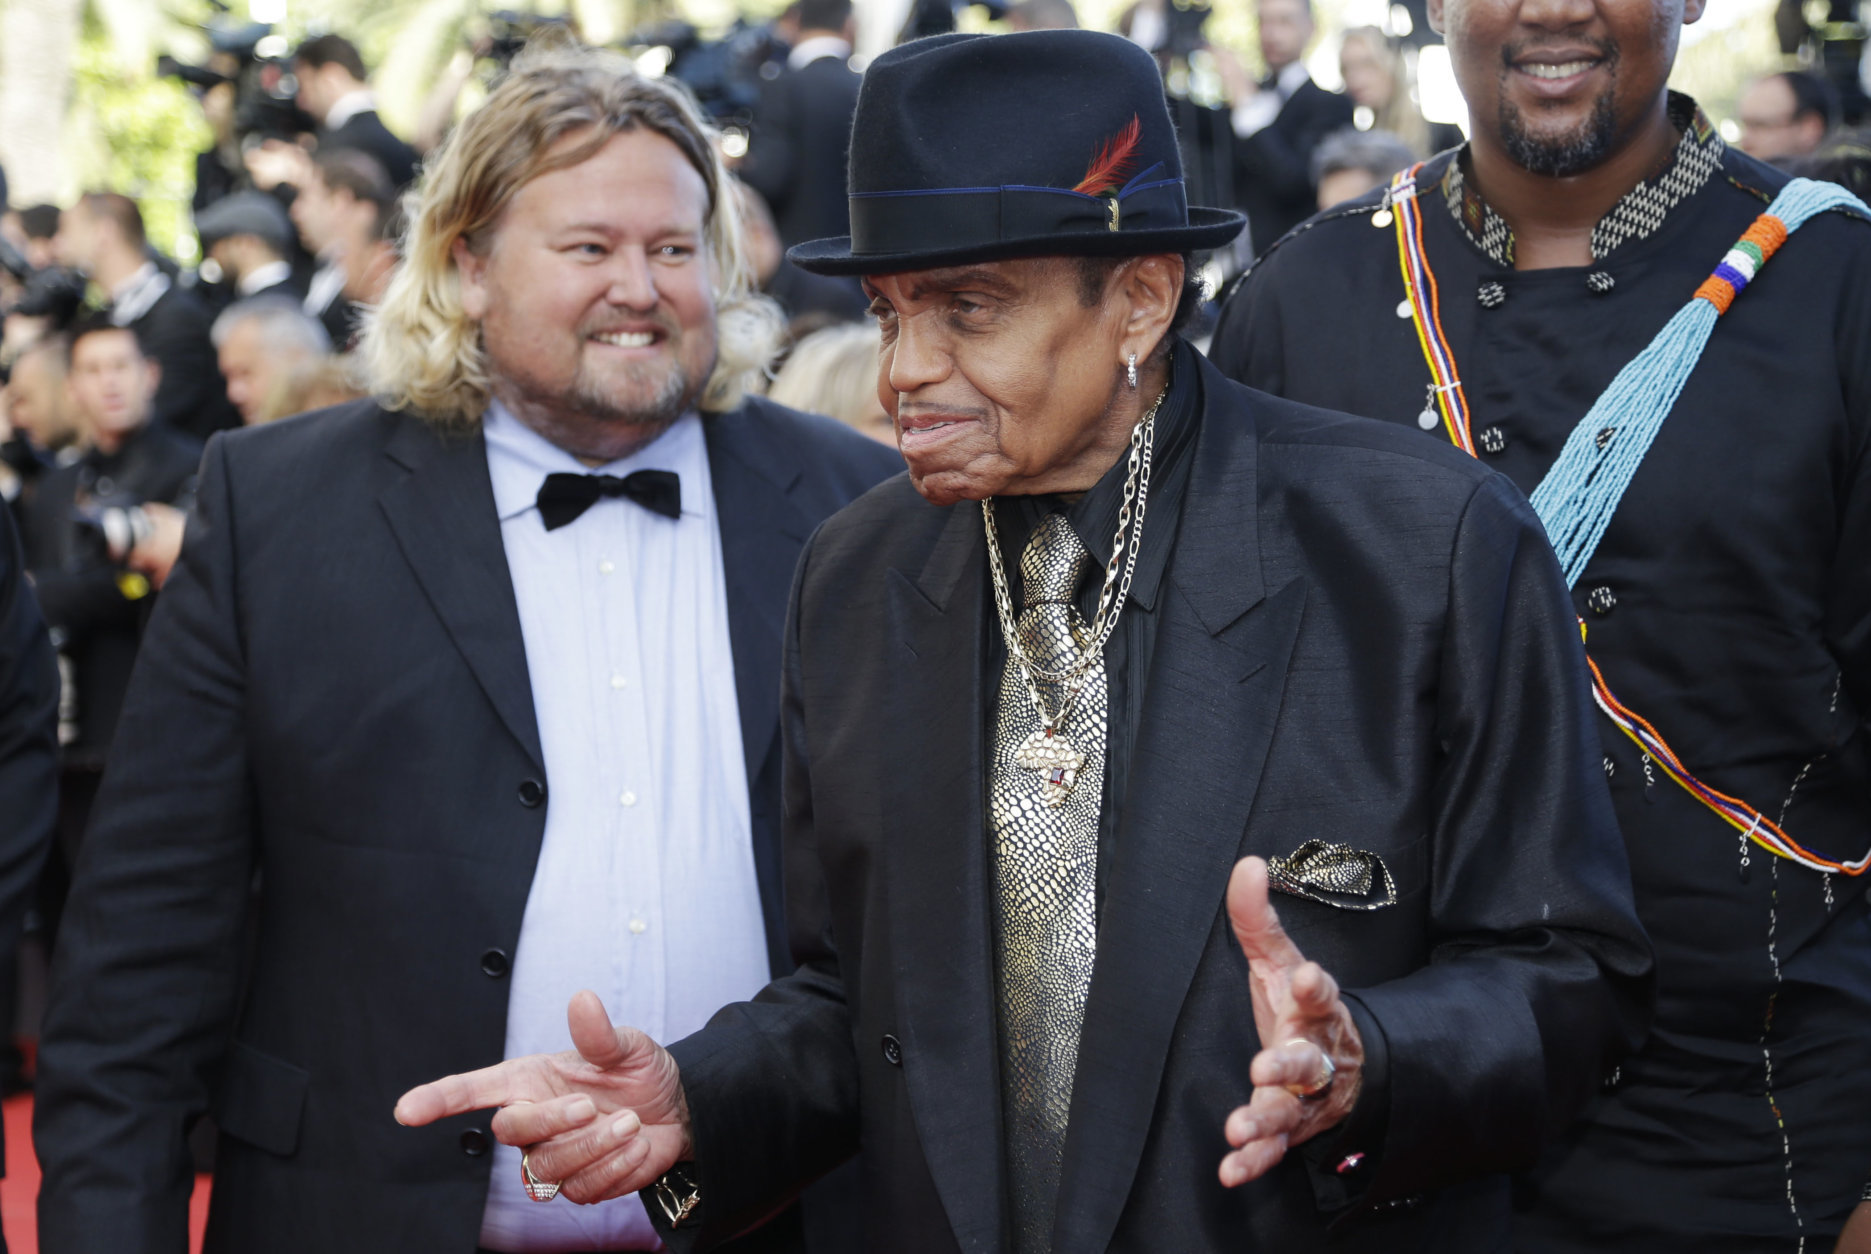 FILE  - In this Friday, May 23, 2014 file photo, Joe Jackson arrives for the screening of Sils Maria at the 67th international film festival, Cannes, southern France. A Brazilian hospital says Joe Jackson  the father of the late Michael Jackson and the patriarch of the musical family  suffered a stroke while visiting the South American nation. An emailed statement early Monday, July 27, 2015 from the Albert Einstein hospital in Sao Paulo says only that Jackson was admitted to the hospital Sunday afternoon. He is in the intensive care unit. (AP Photo/Thibault Camus, file)